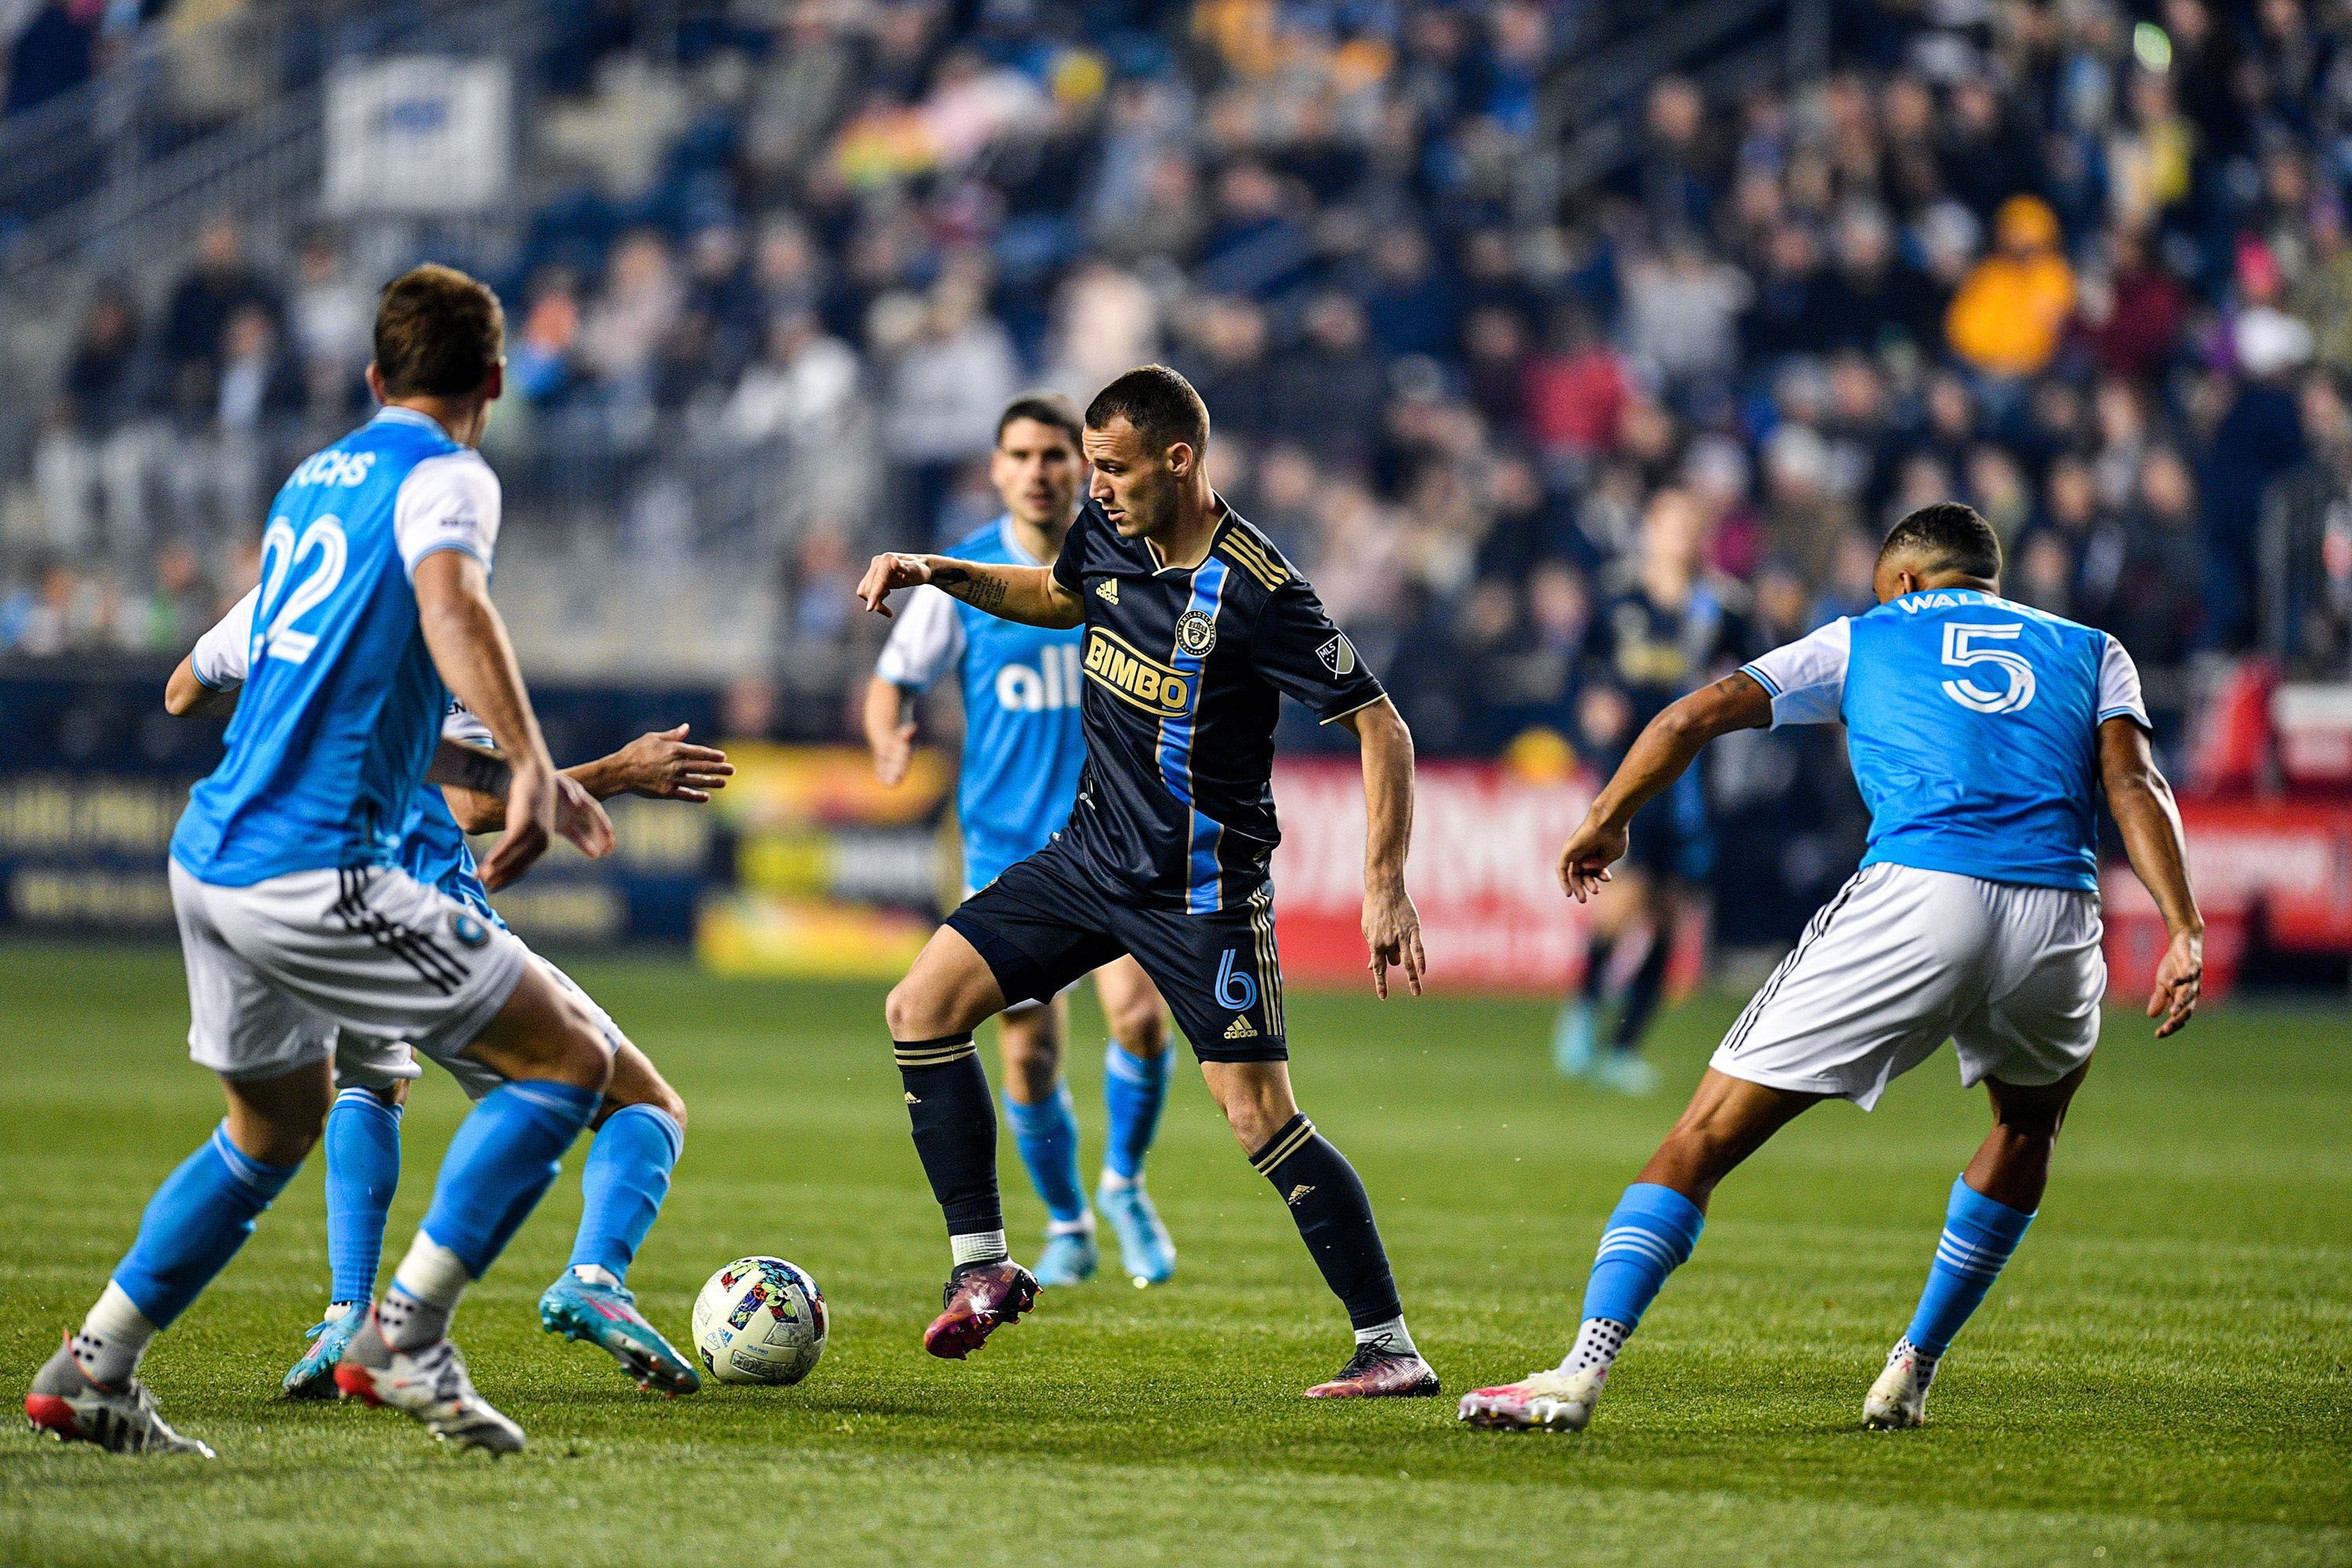 Union make quick work of expansion Charlotte, 2-0